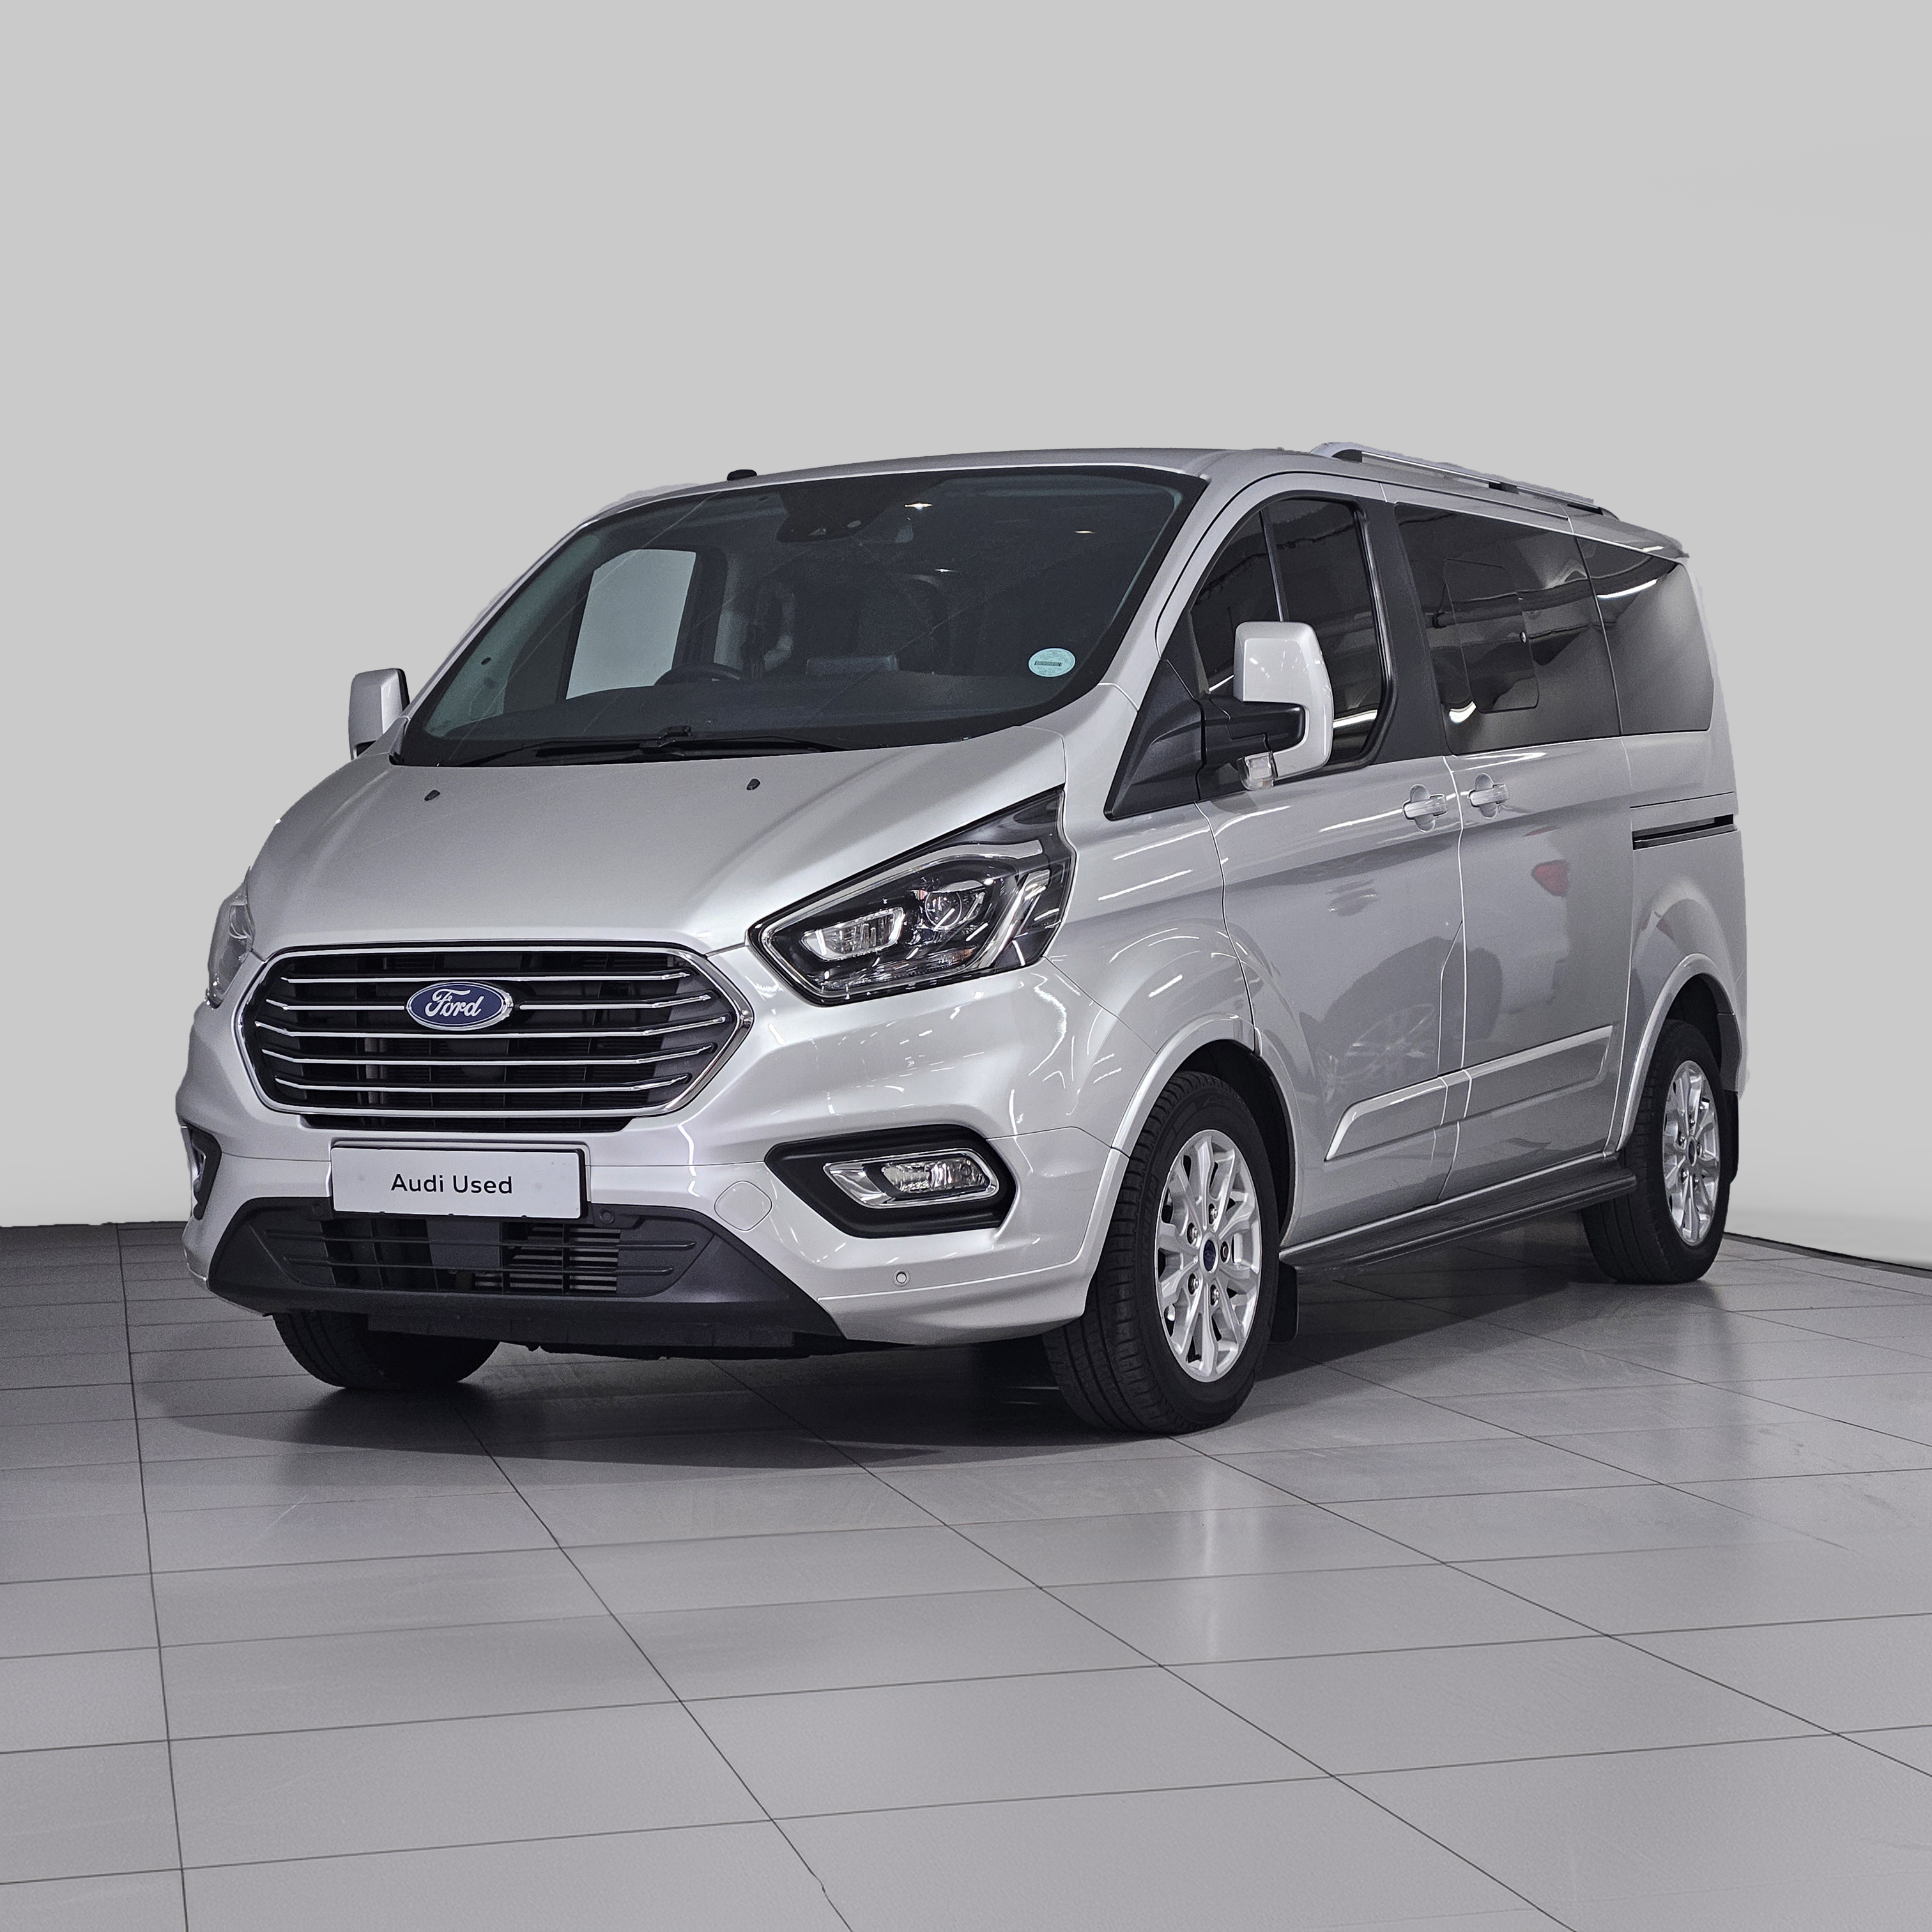 2022 Ford Tourneo Custom  for sale - FOrd